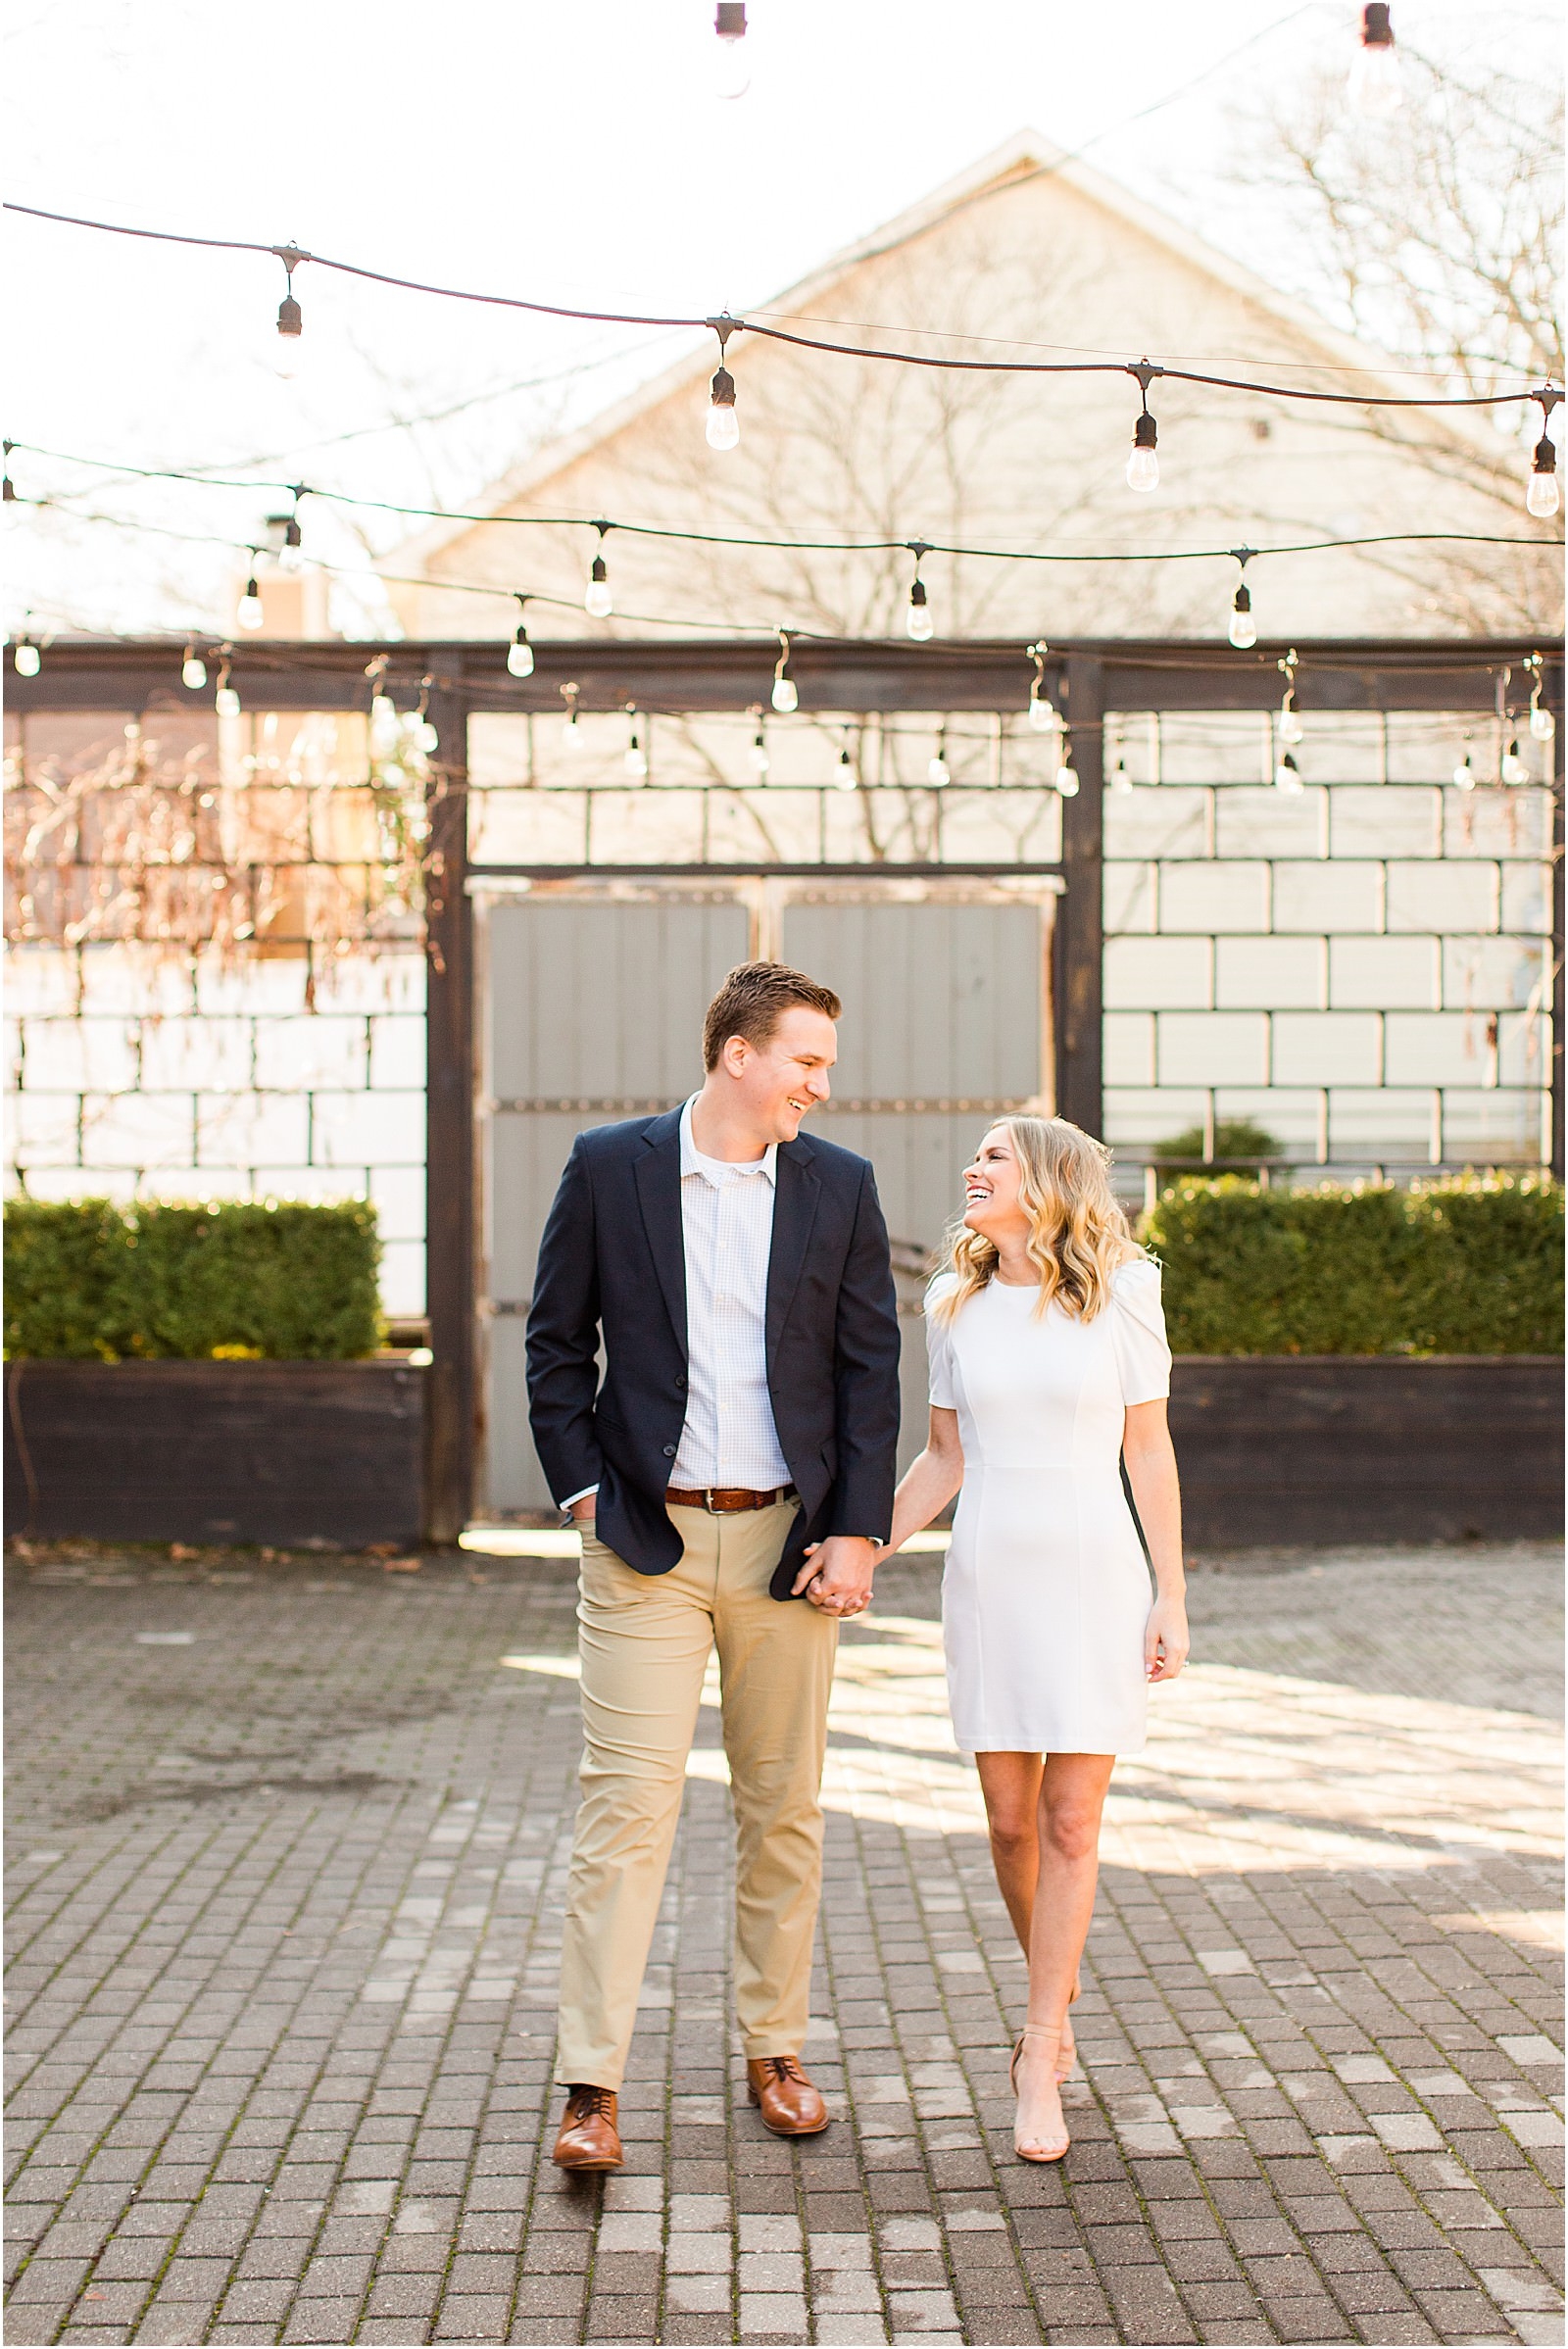 Madison and Christaan | A 20 West Engagement Session in Downto wn Newburgh | Bret and Brandie Photography006.jpg